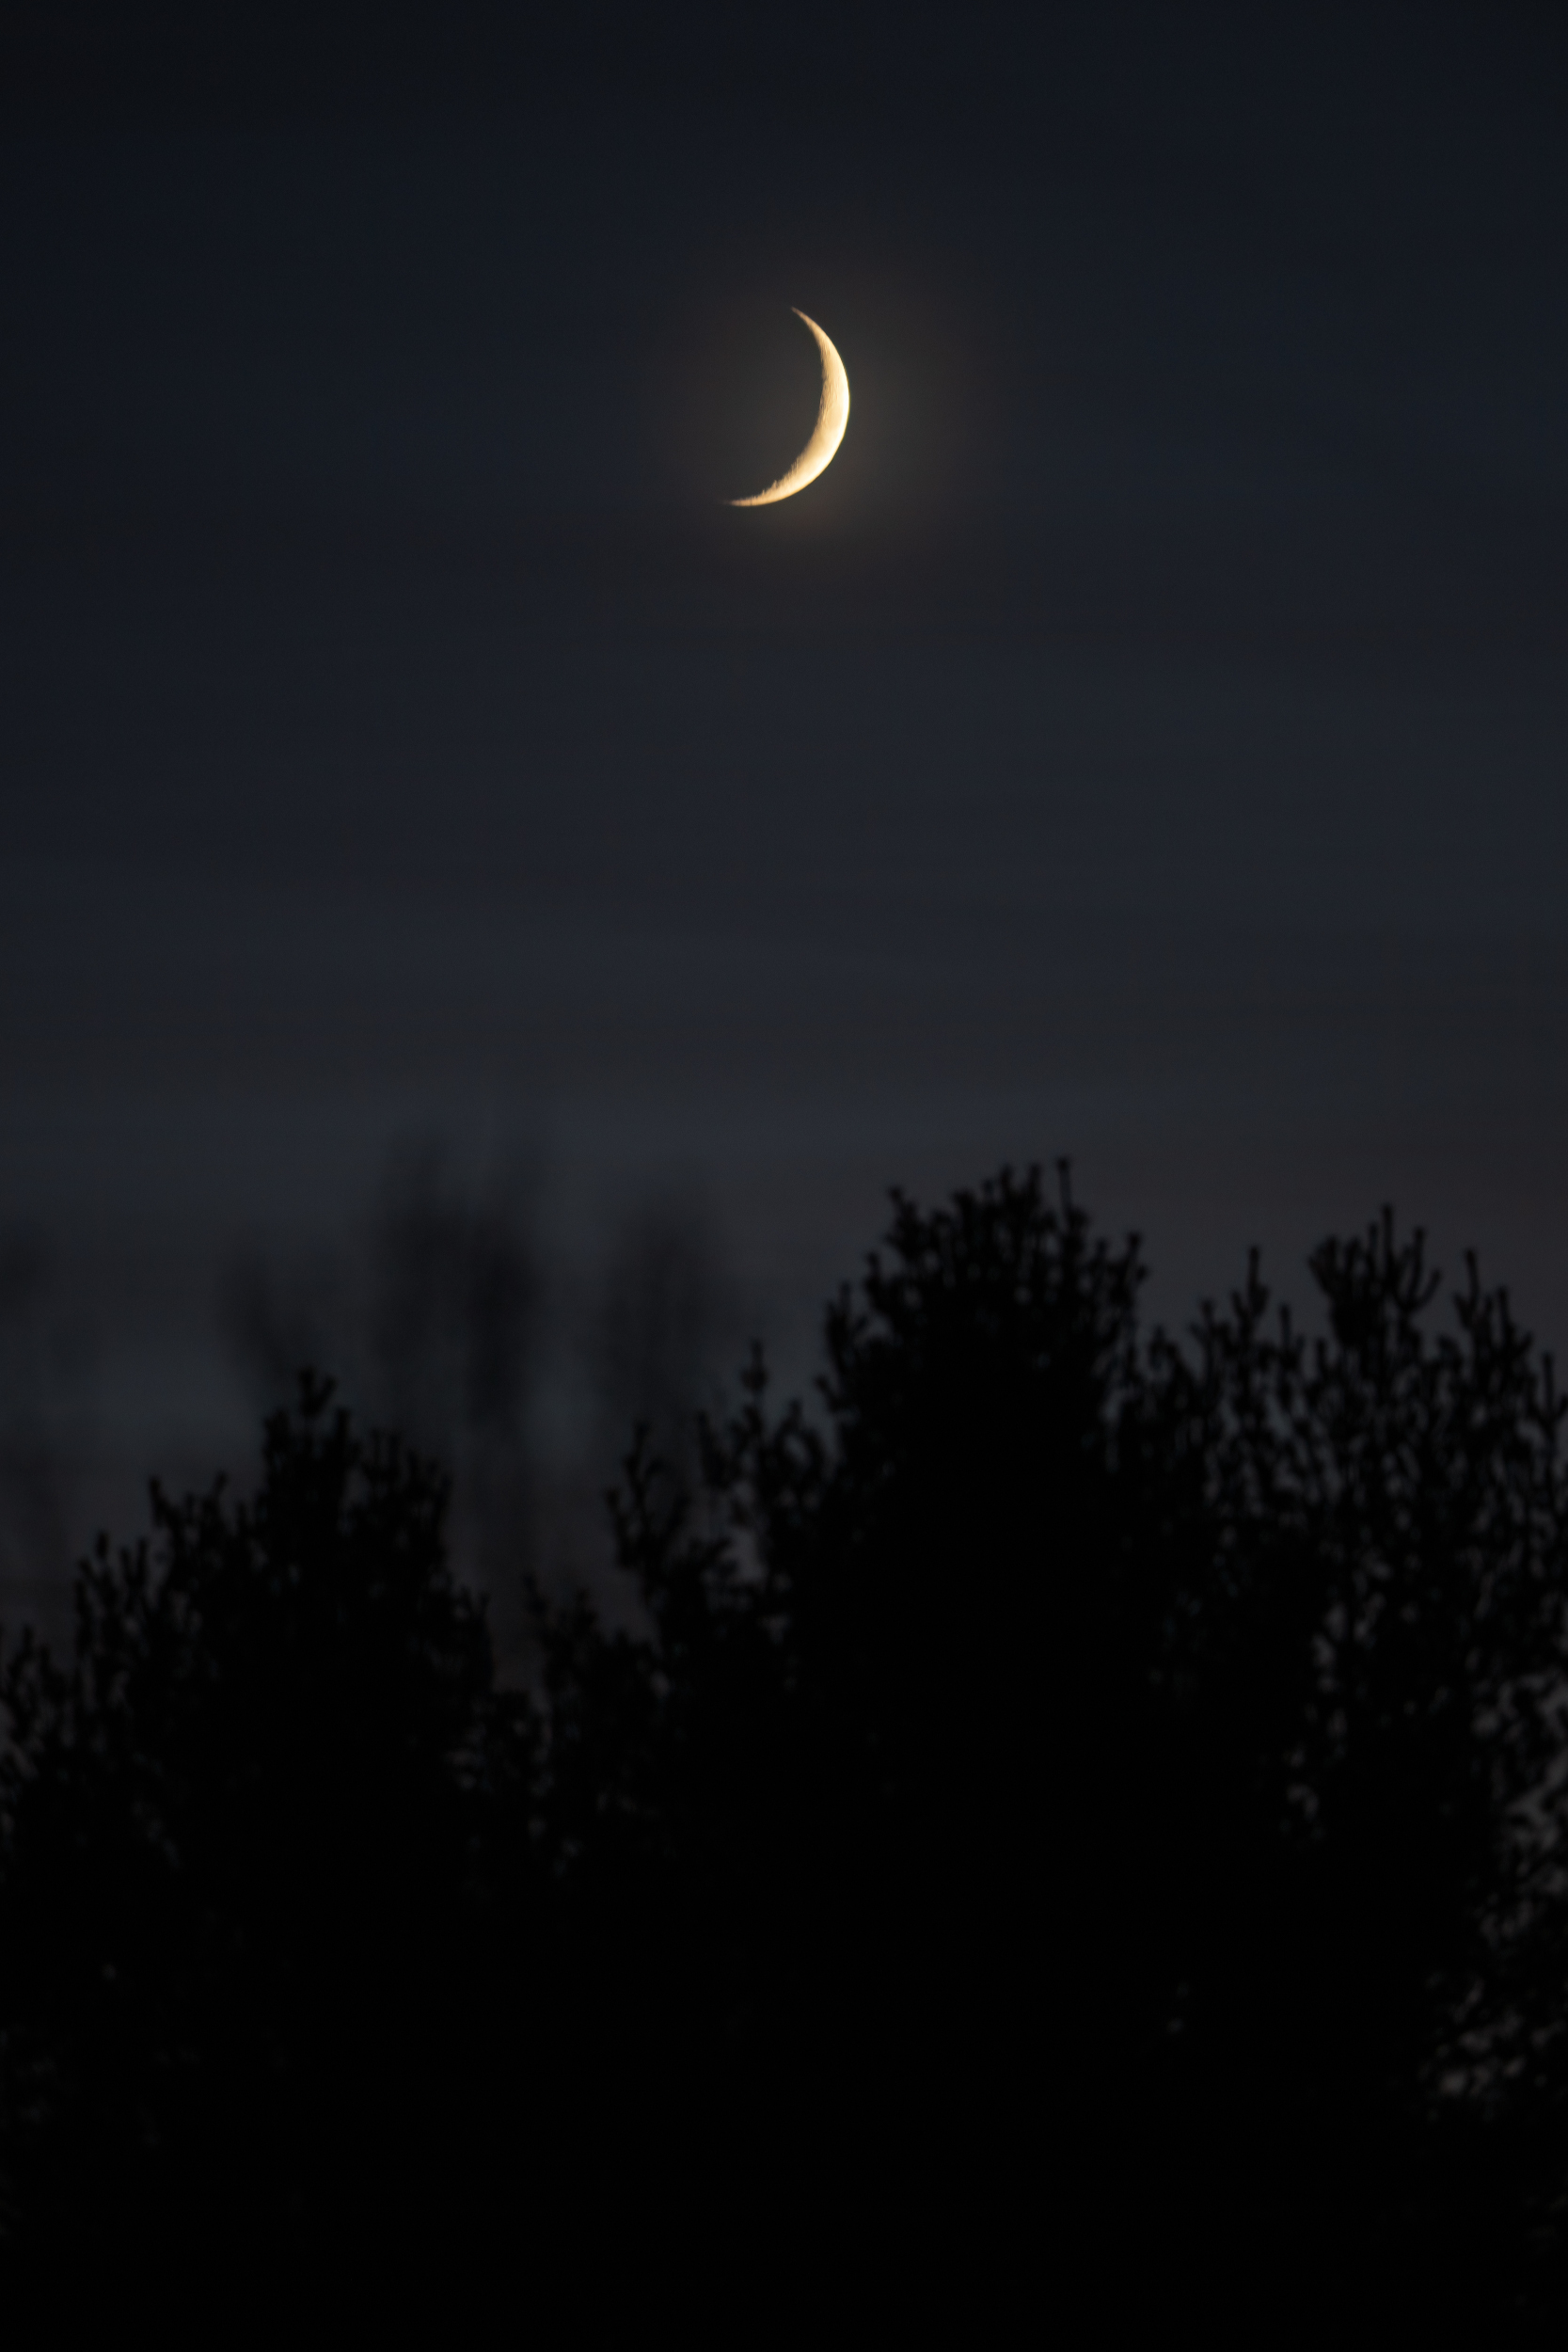 a photo a skinny crescent moon above some slightly out-of-focus trees and with some faint whispy clouds streaking the dark evening sky just 10 minutes after sunset.